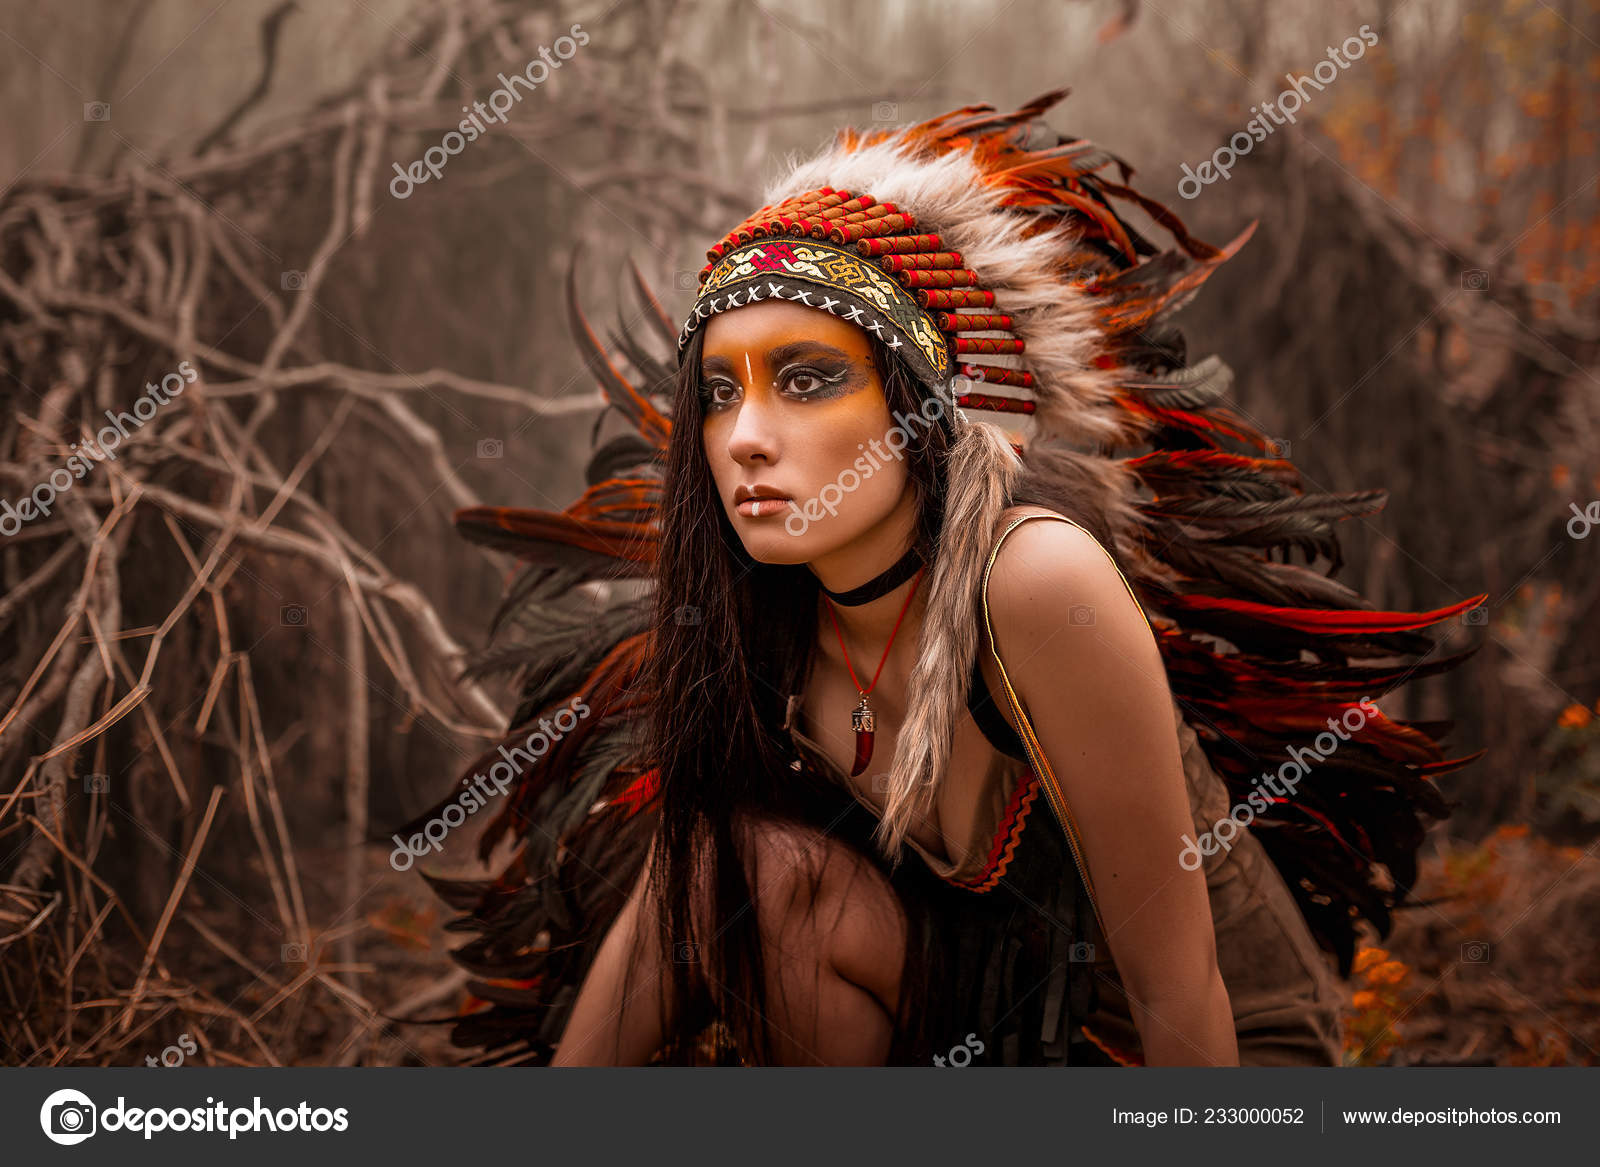 Native American Indians Traditional Dress Stands Stock Photo 138891350 |  Shutterstock